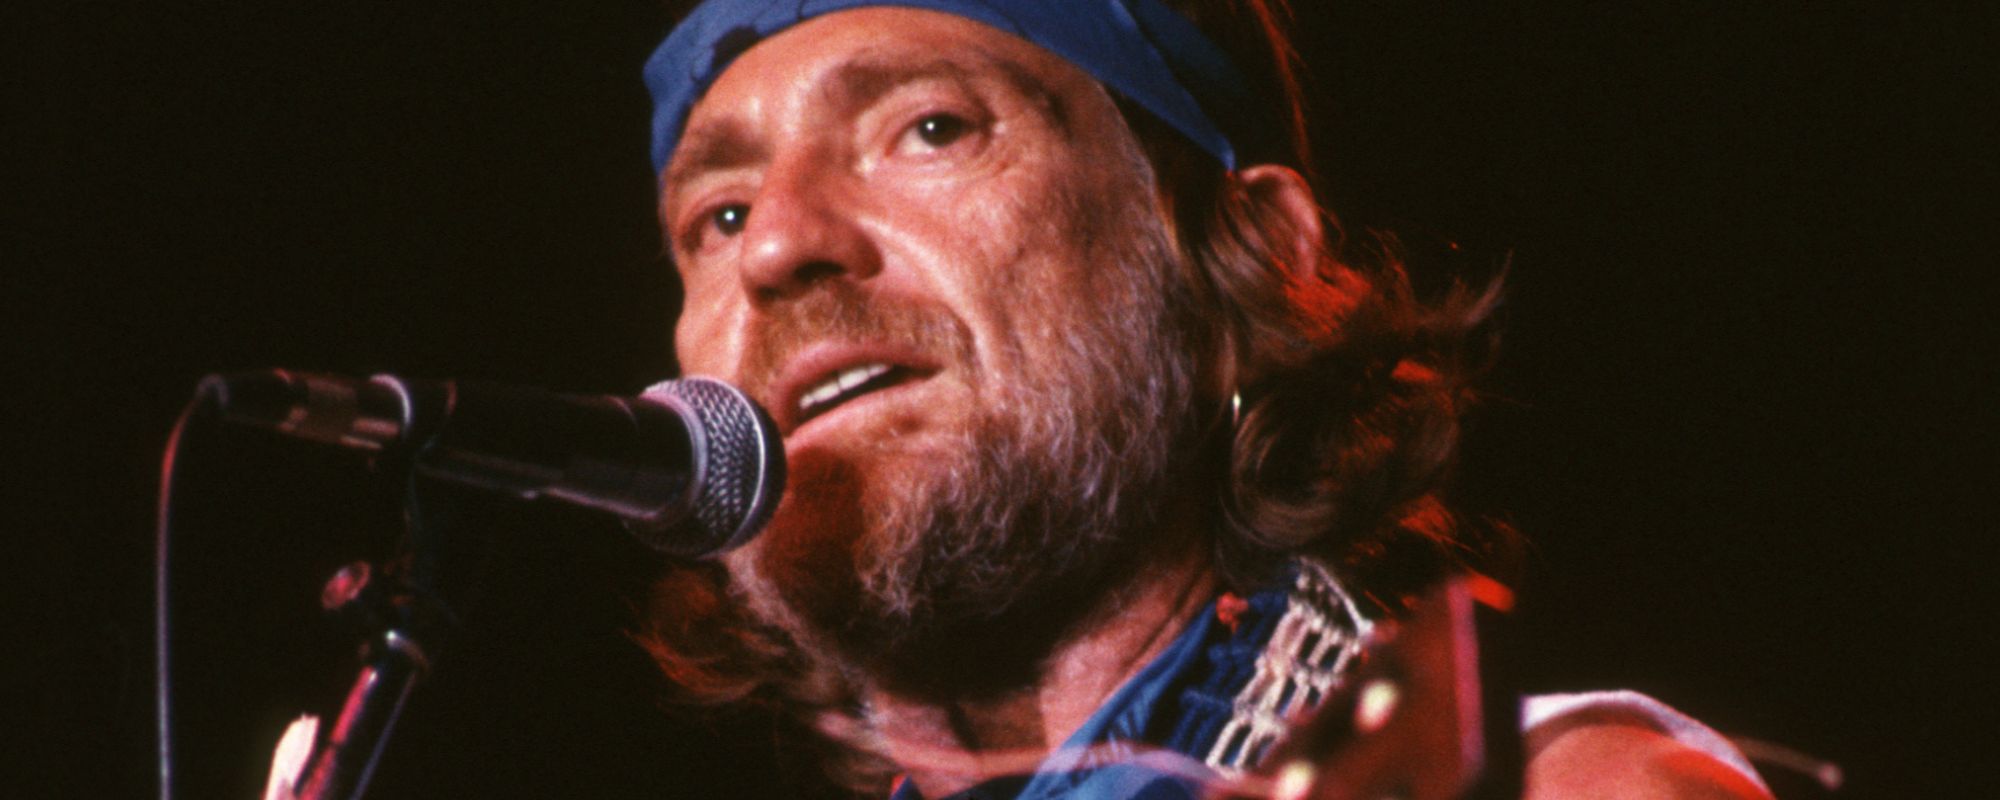 3 Eternal Willie Nelson Songs that Have Stood the Test of Time